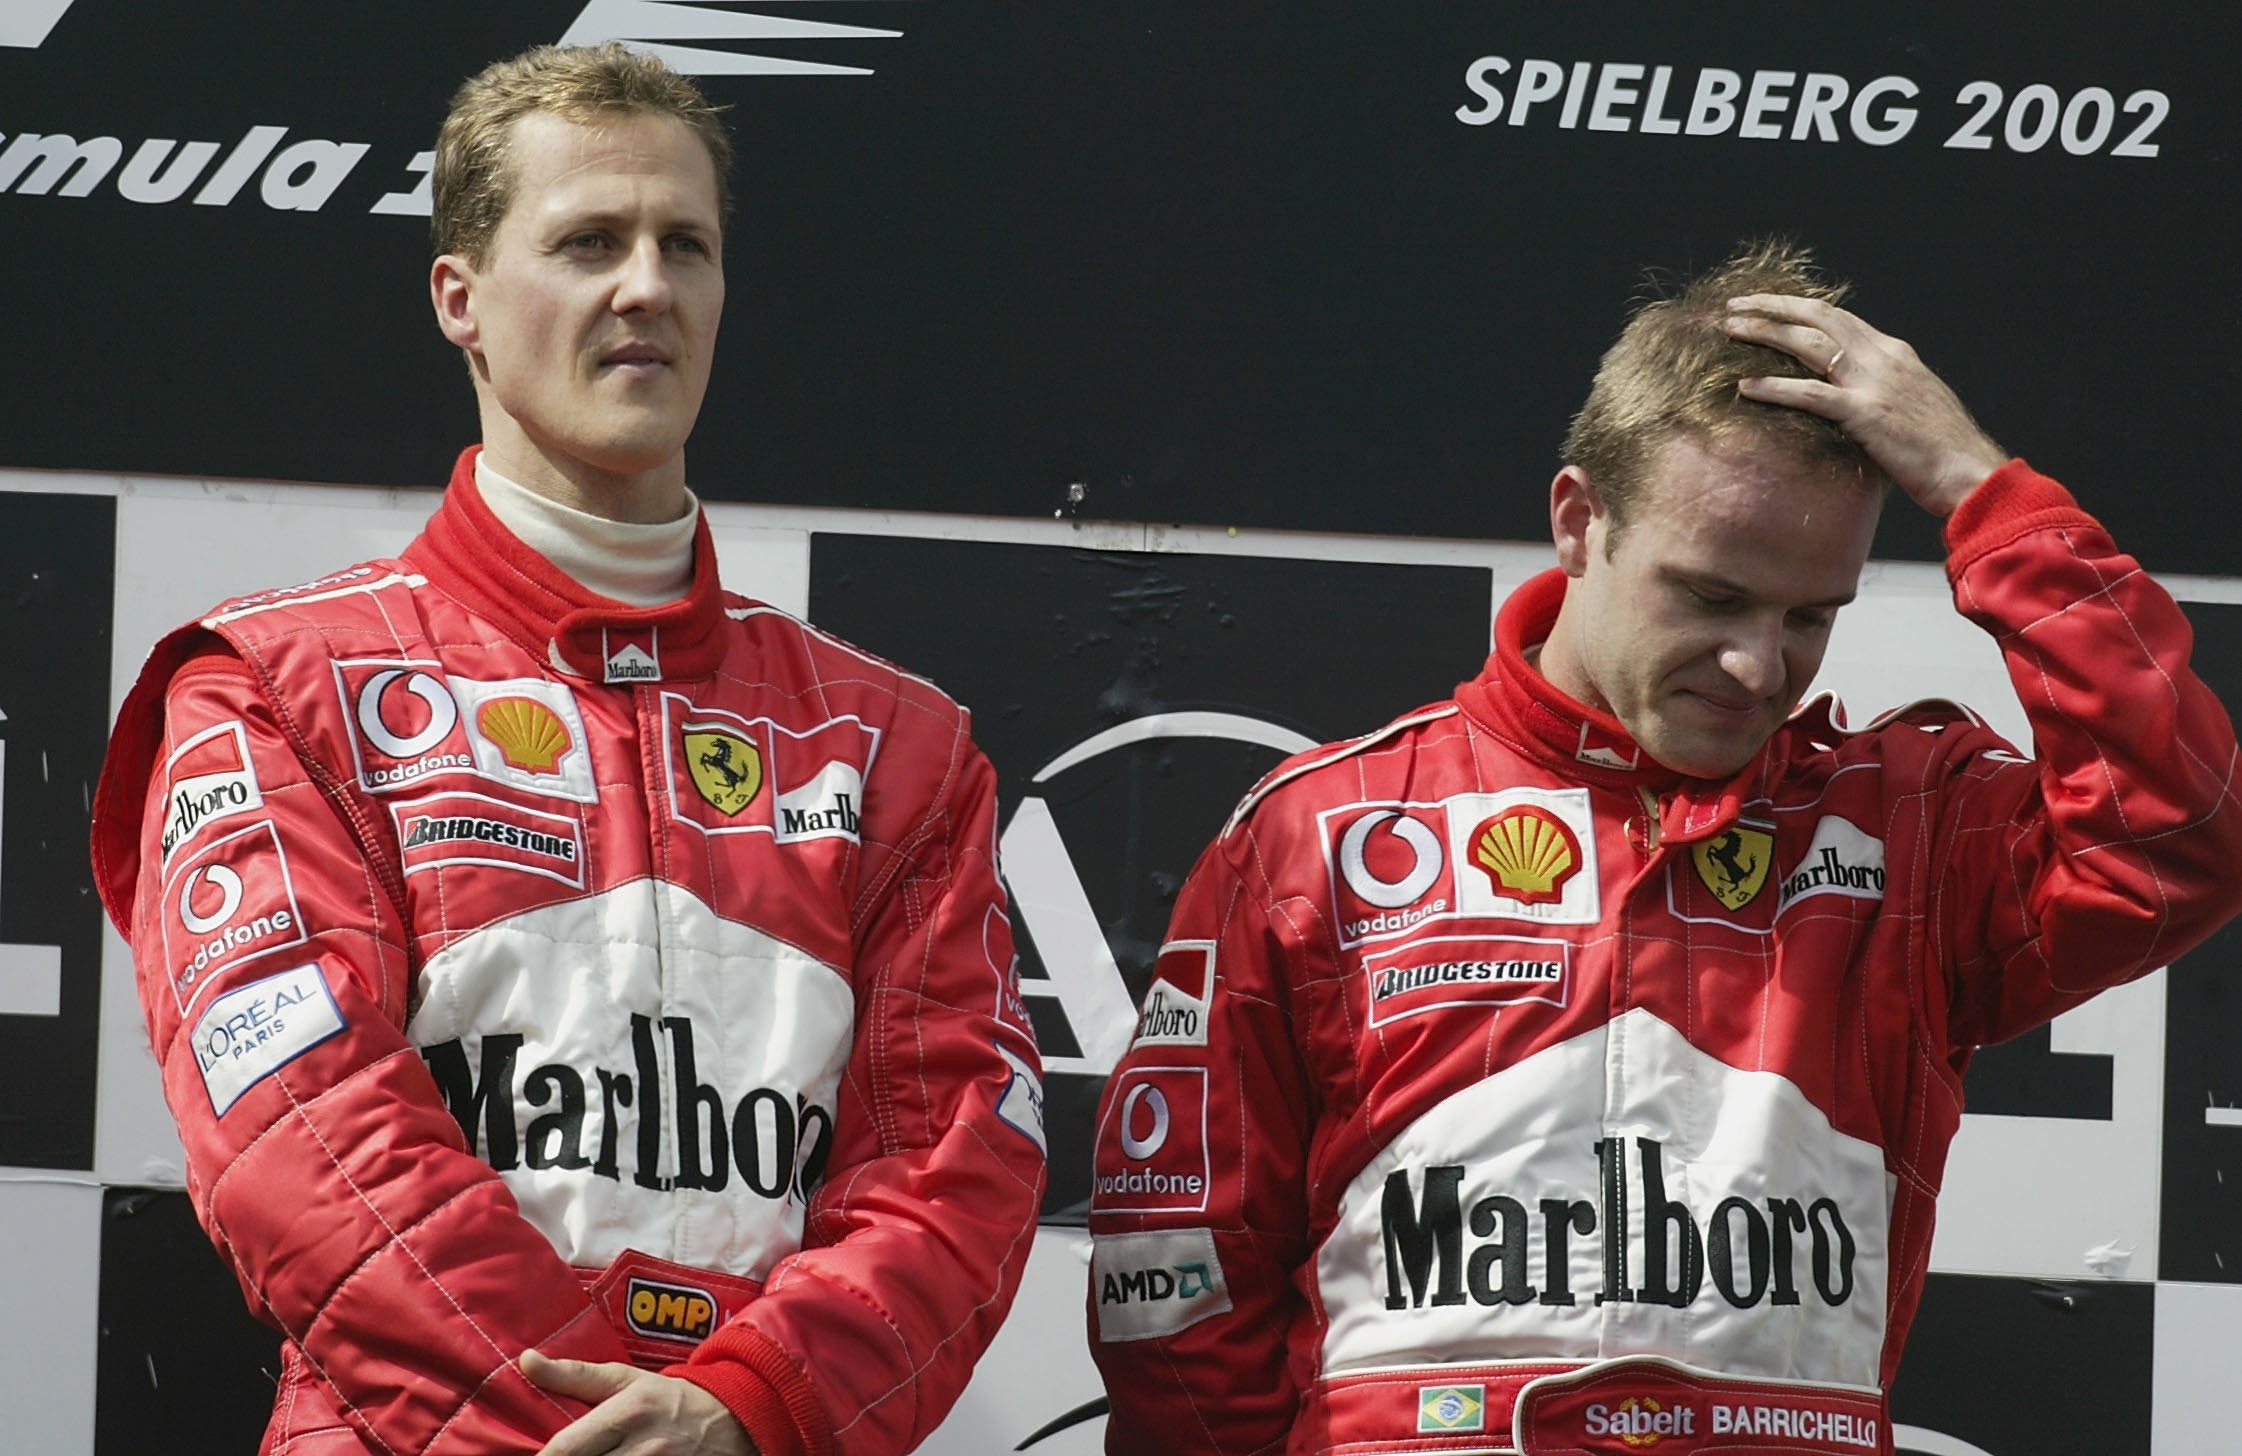 Michael Schumacher, left, and Rubens Barrichello on the podium after the controversial race in 2002